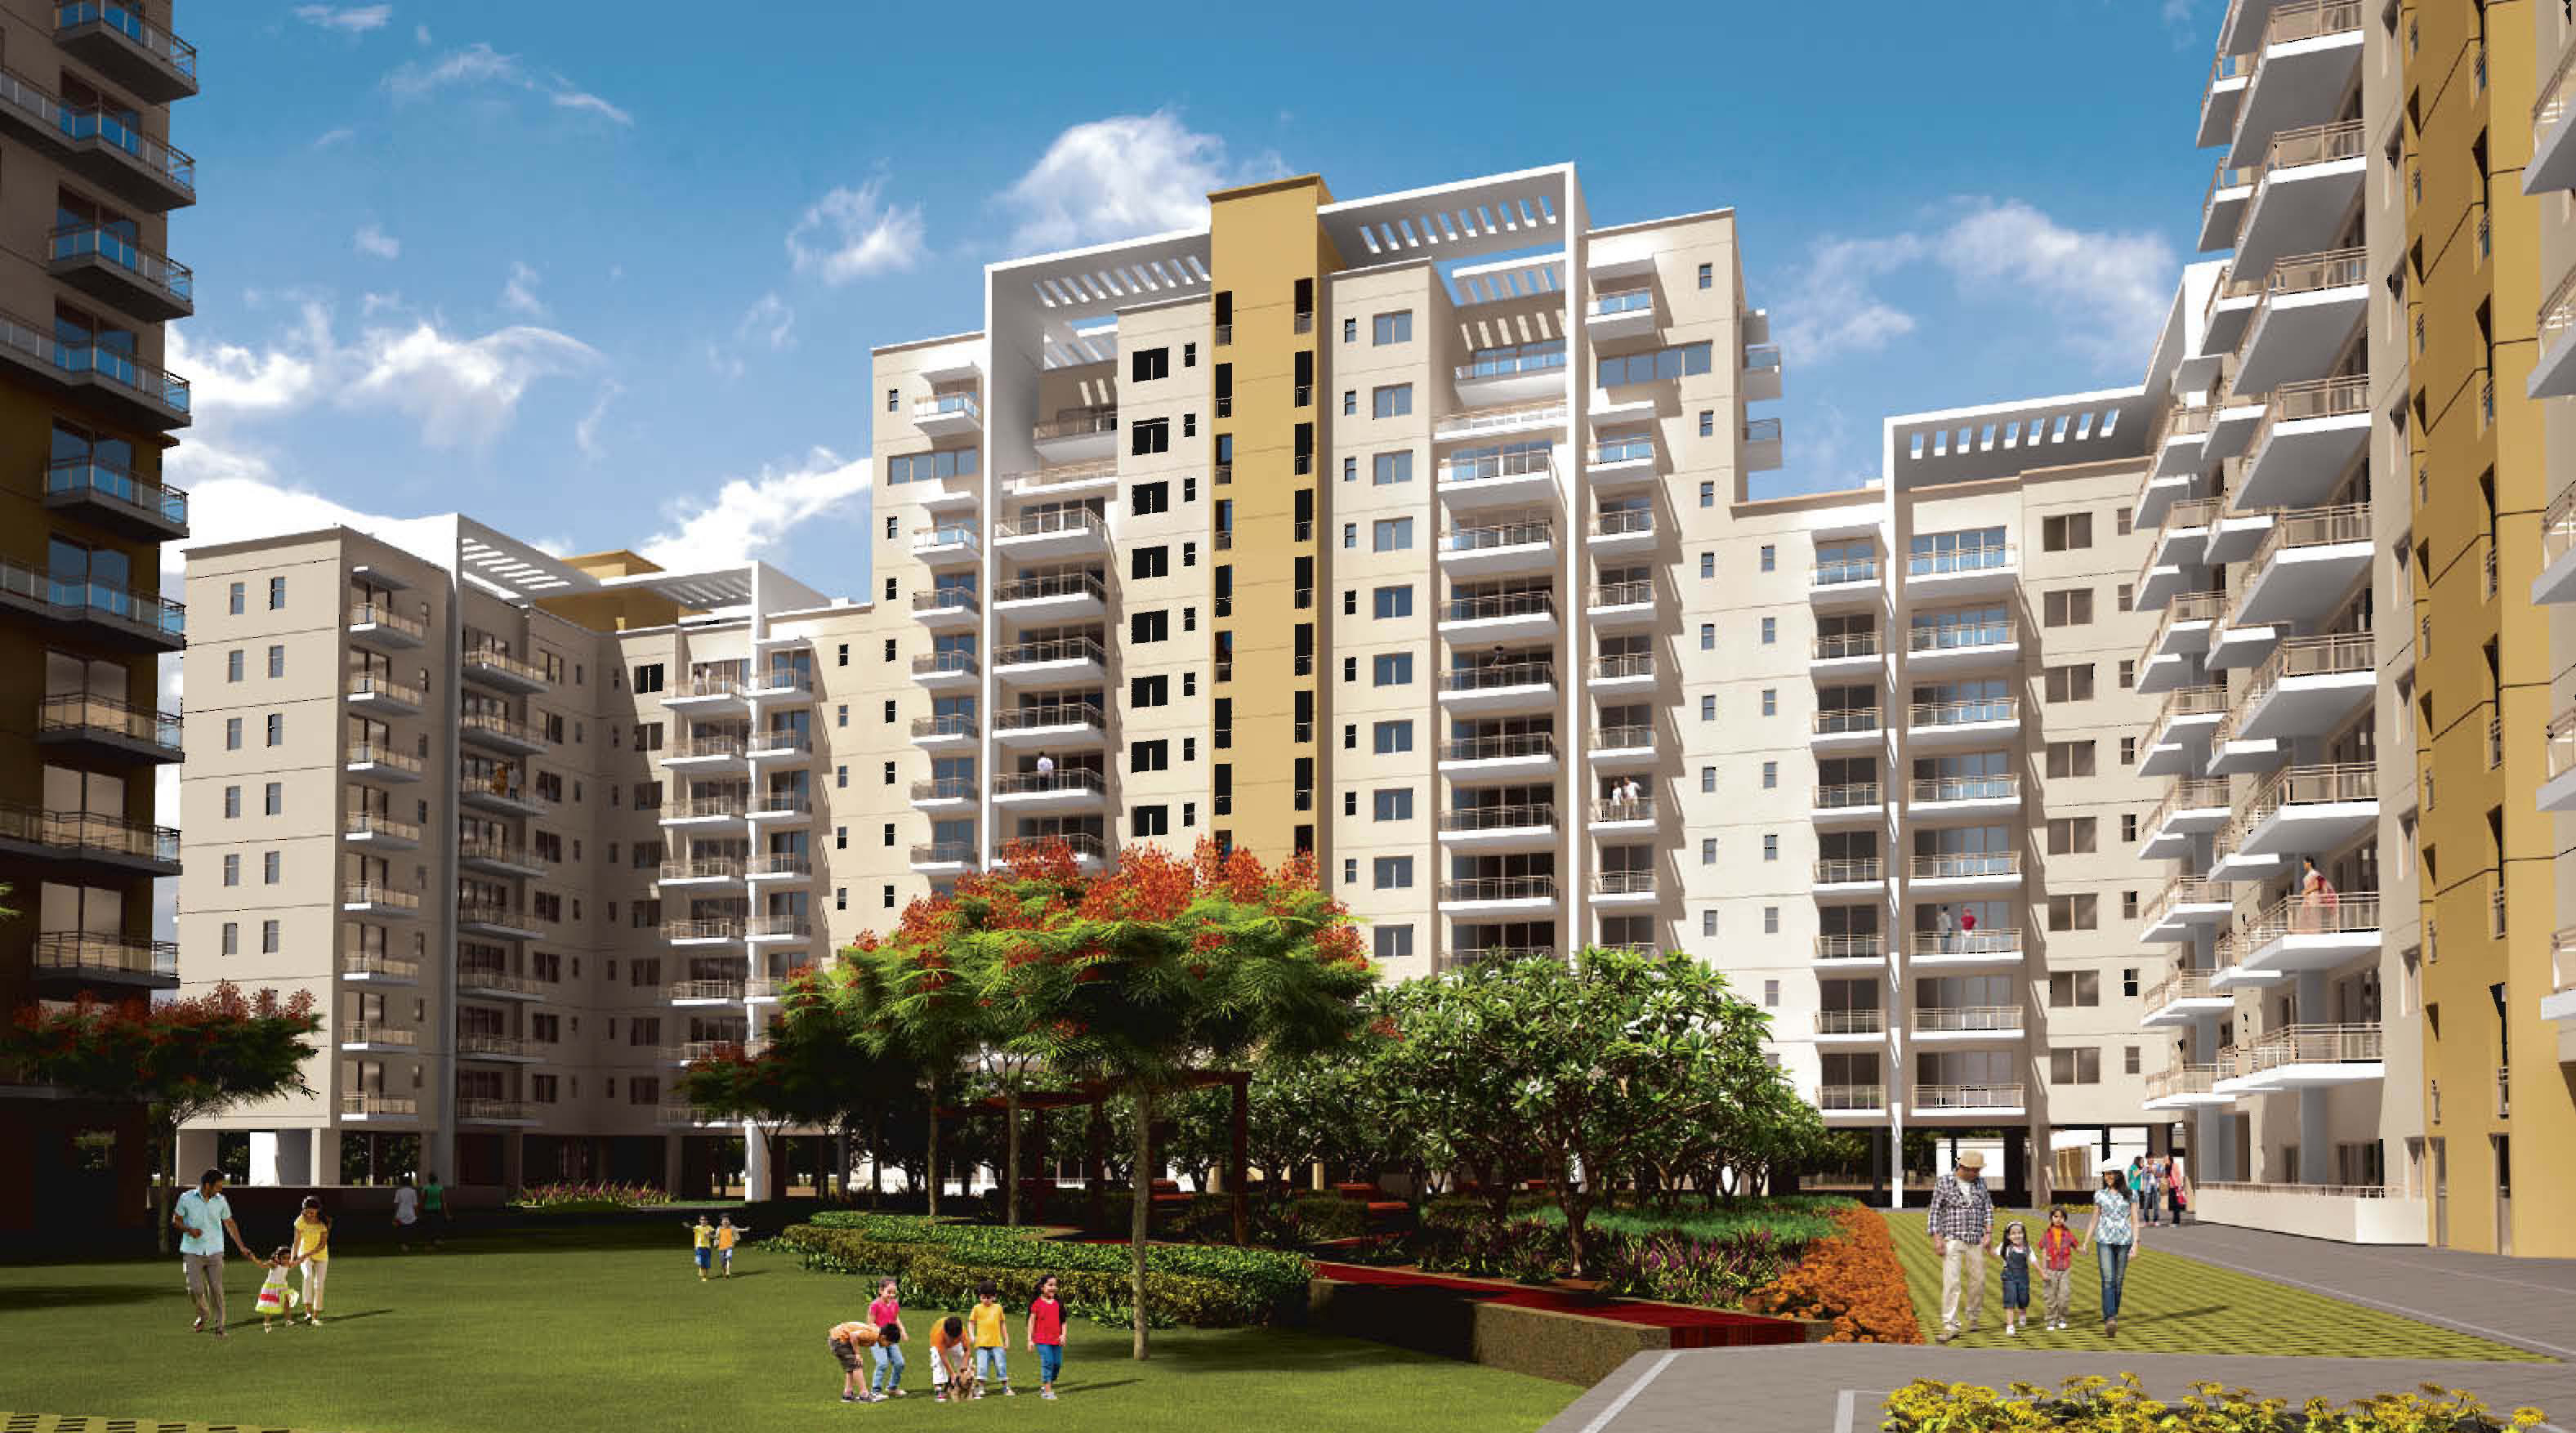 Vatika Sovereign Park offers 3/4 bhk flats in Sector 99